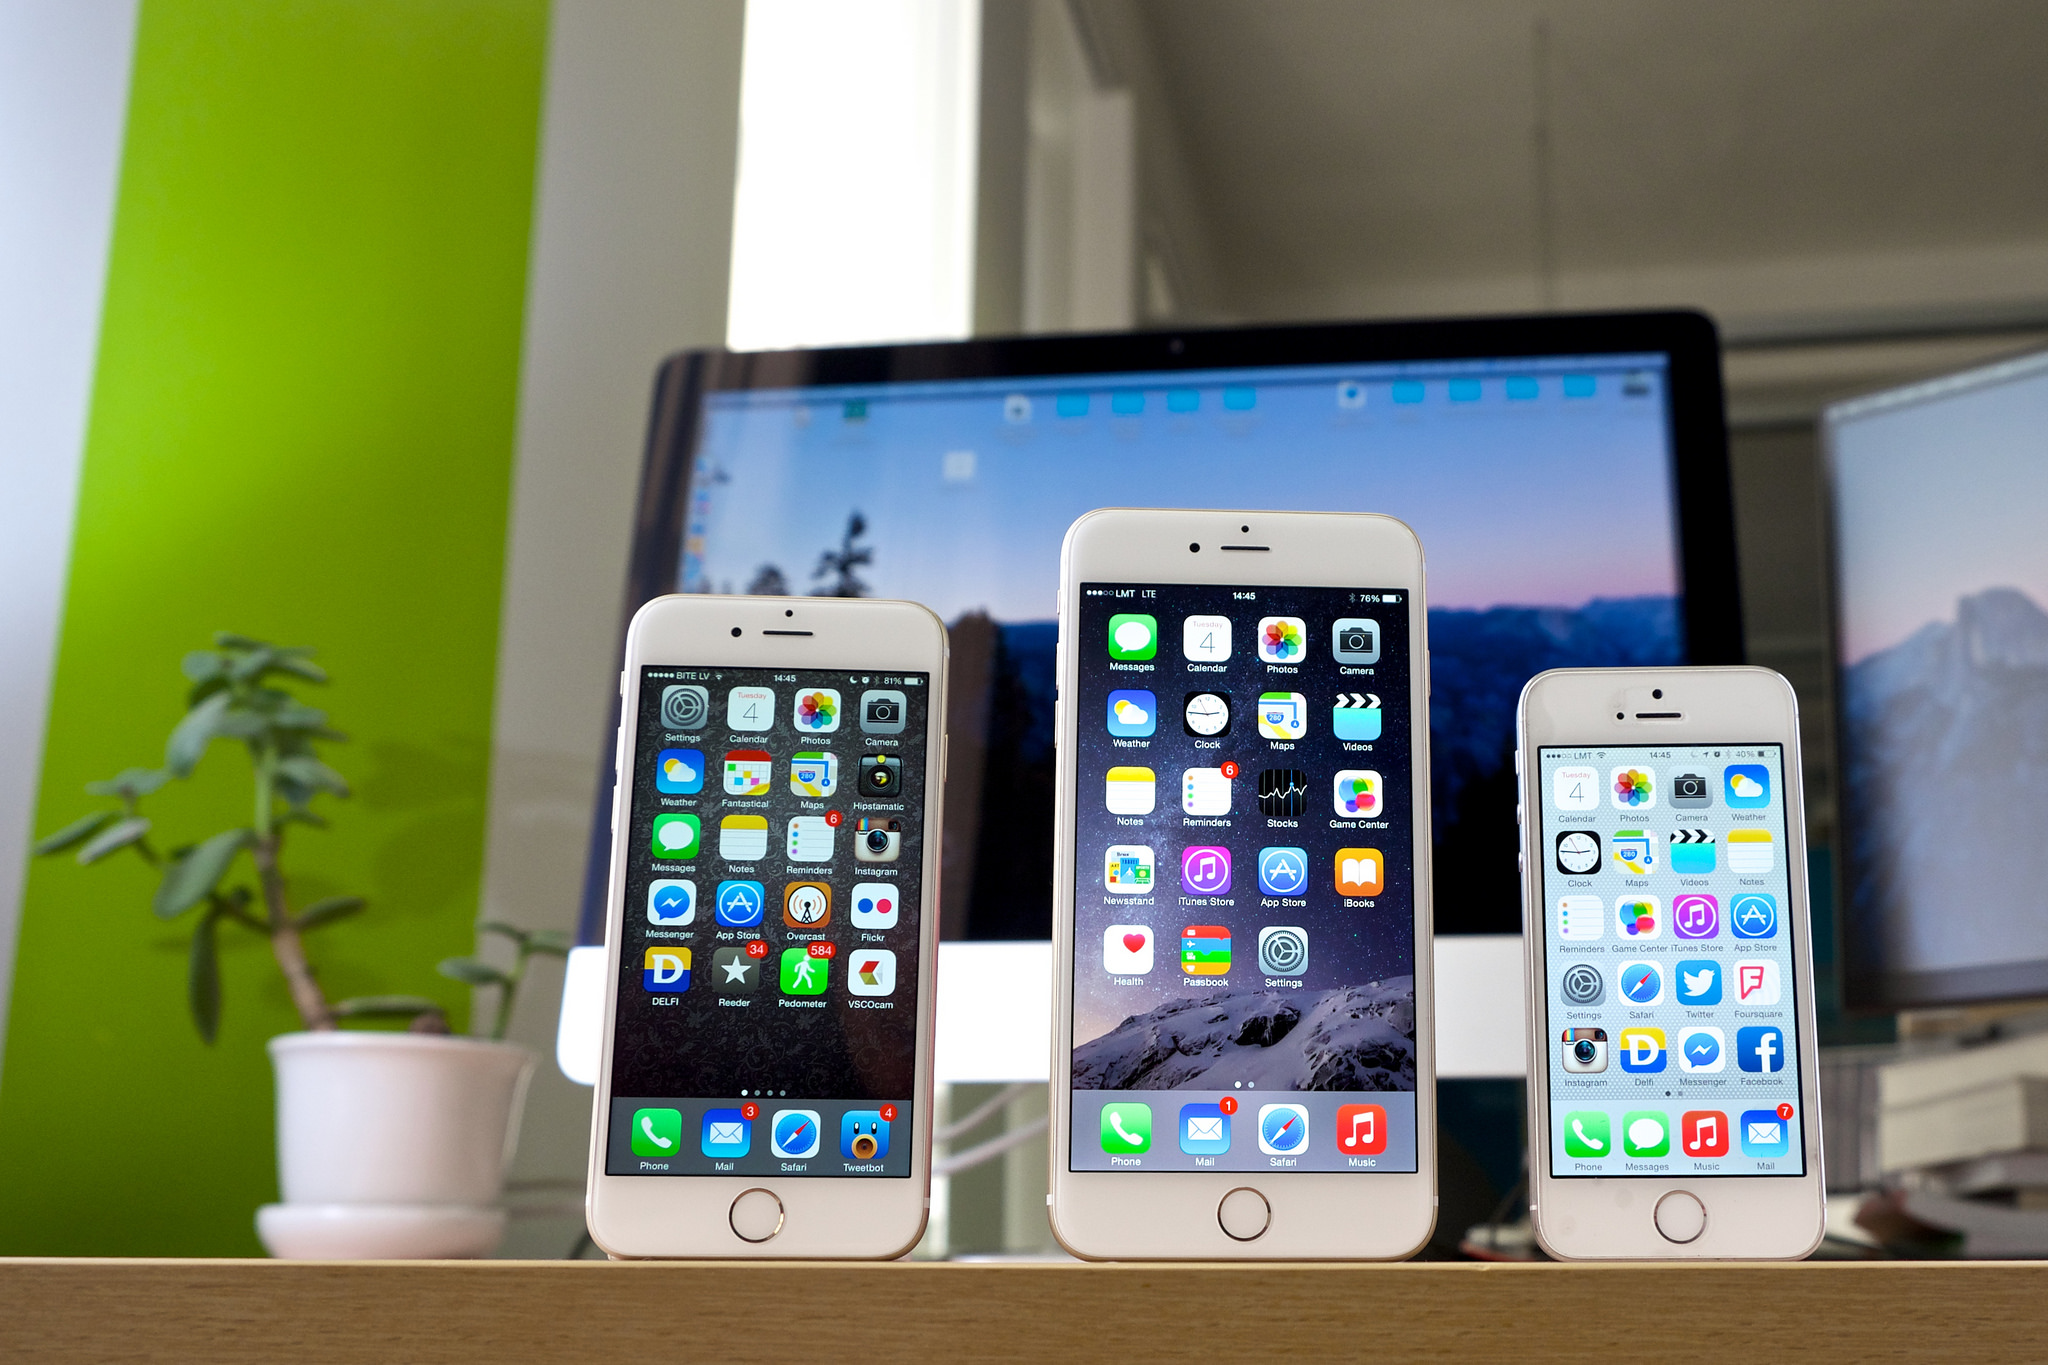 Rumored iPhone vs. iPhone 6s: How the new iPhone stack up? - SiliconANGLE